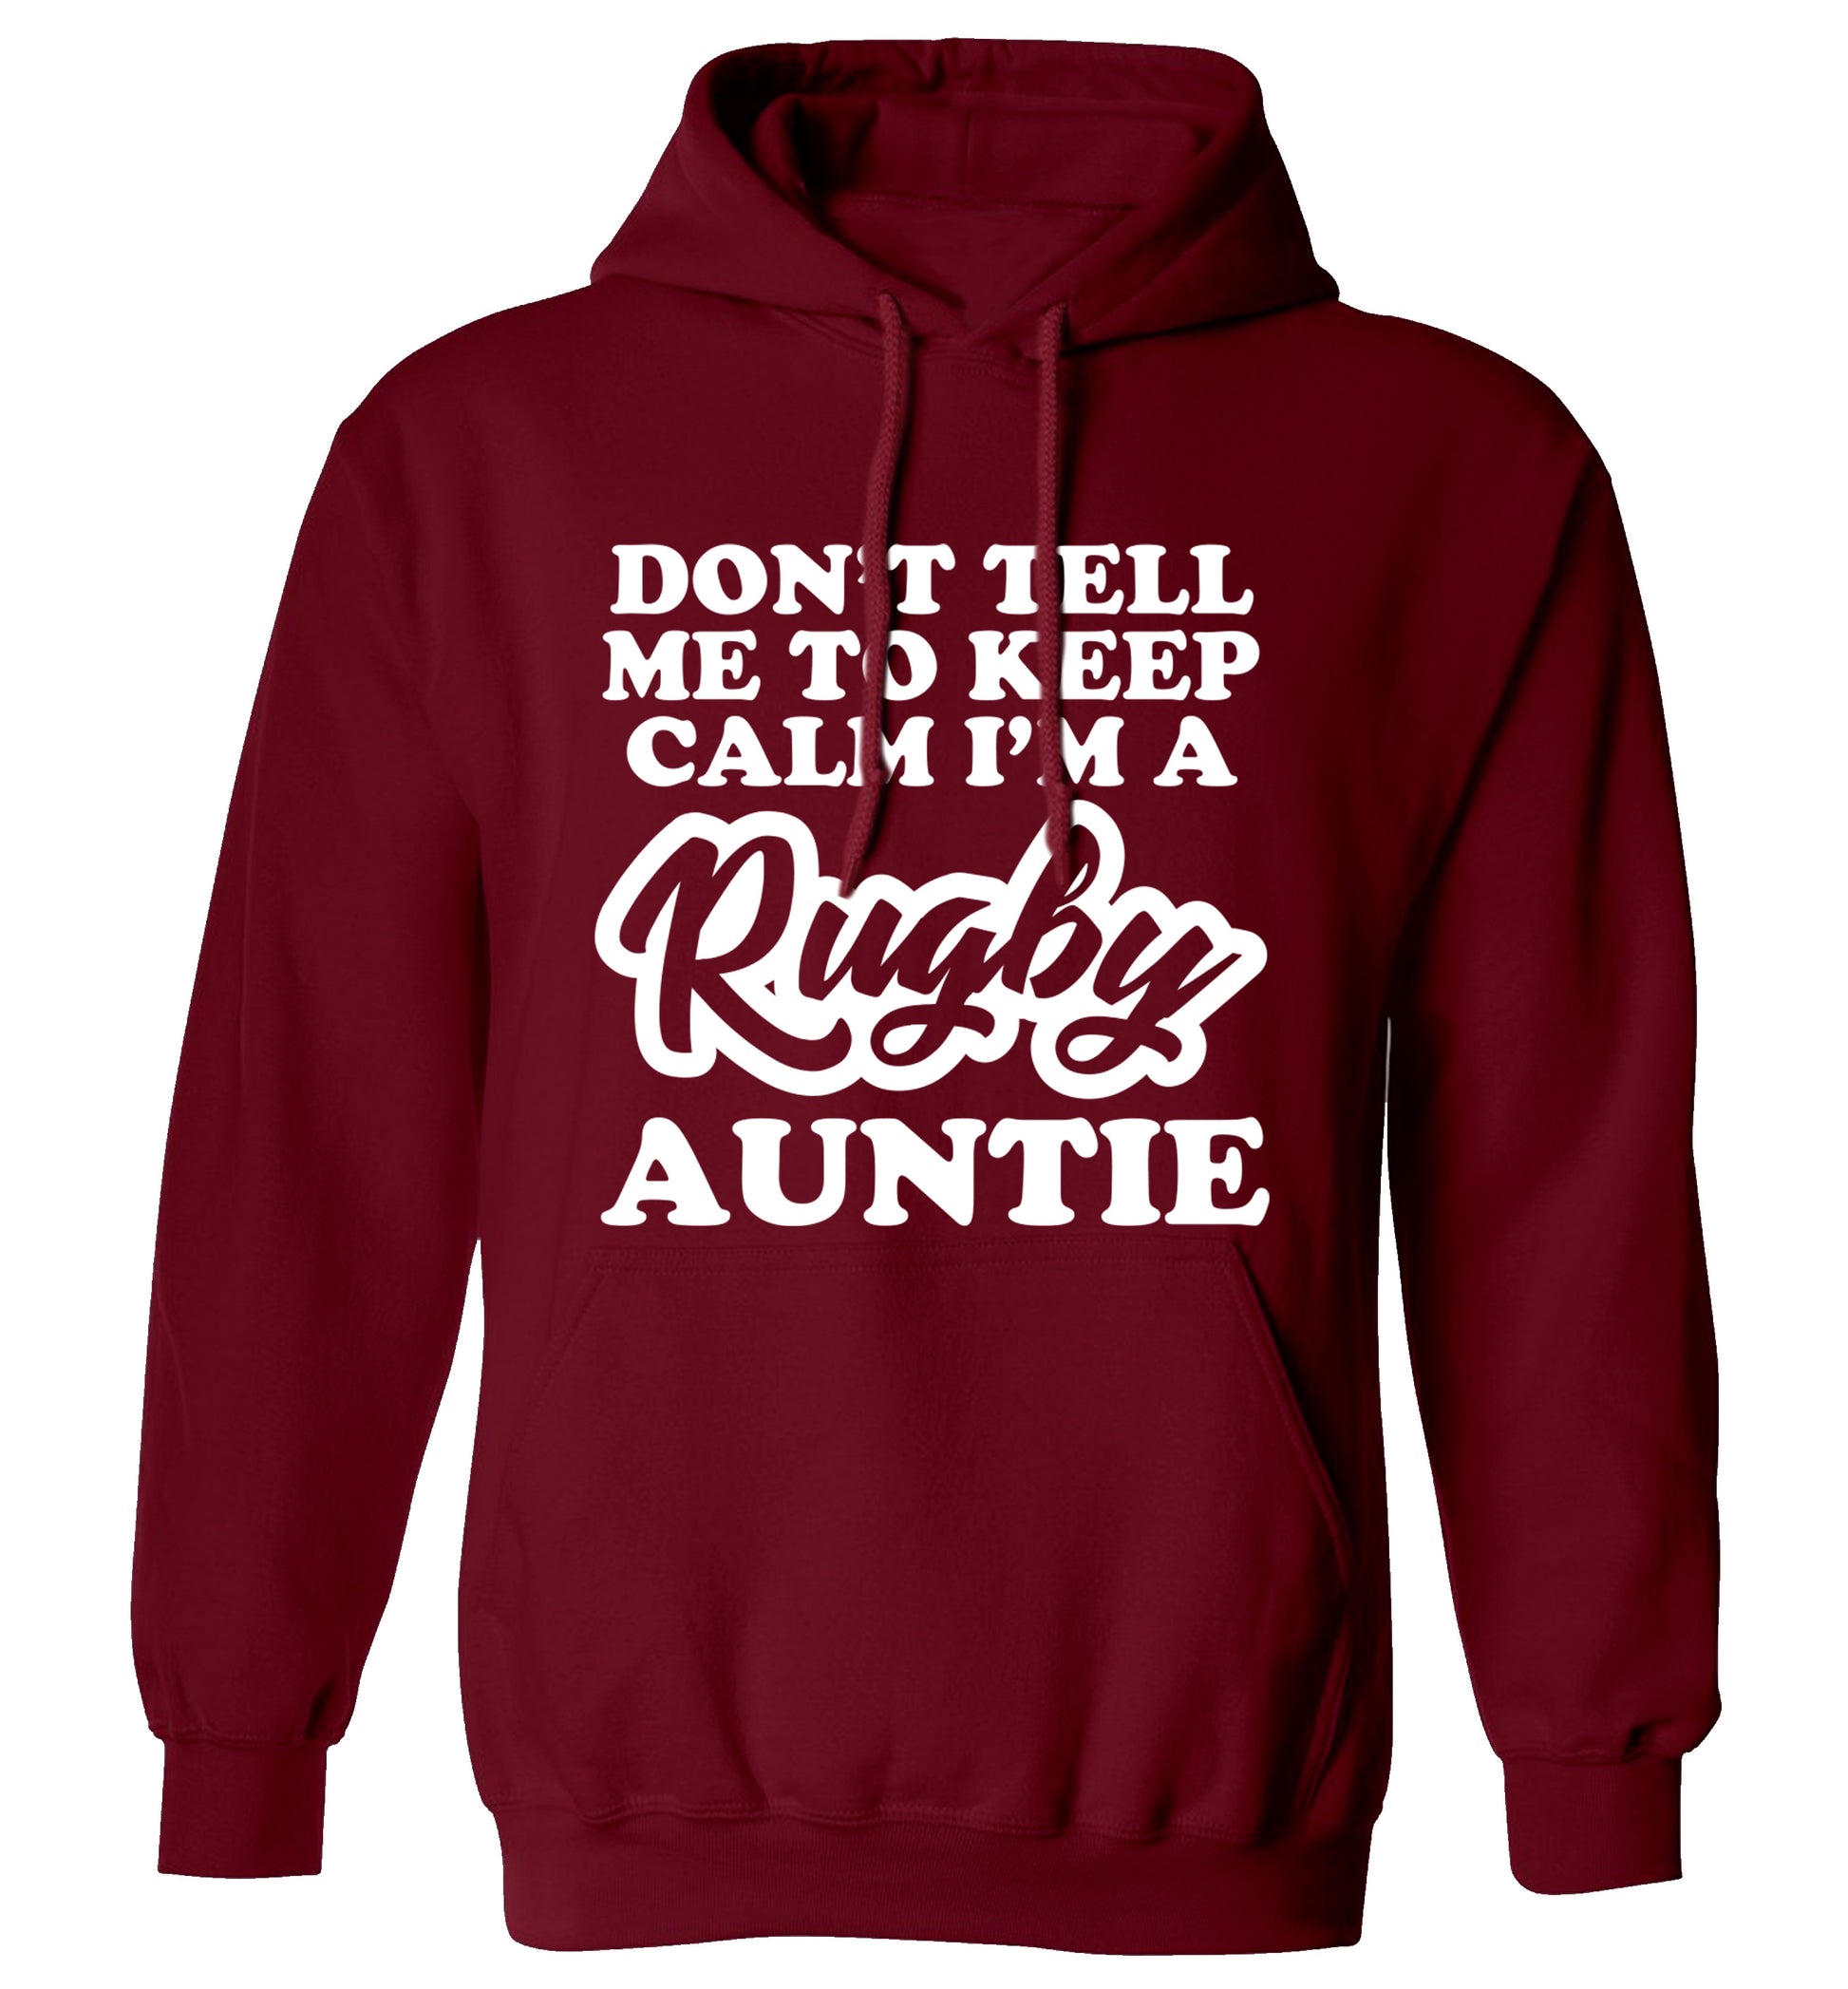 Don't tell me keep calm I'm a rugby auntie adults unisex maroon hoodie 2XL